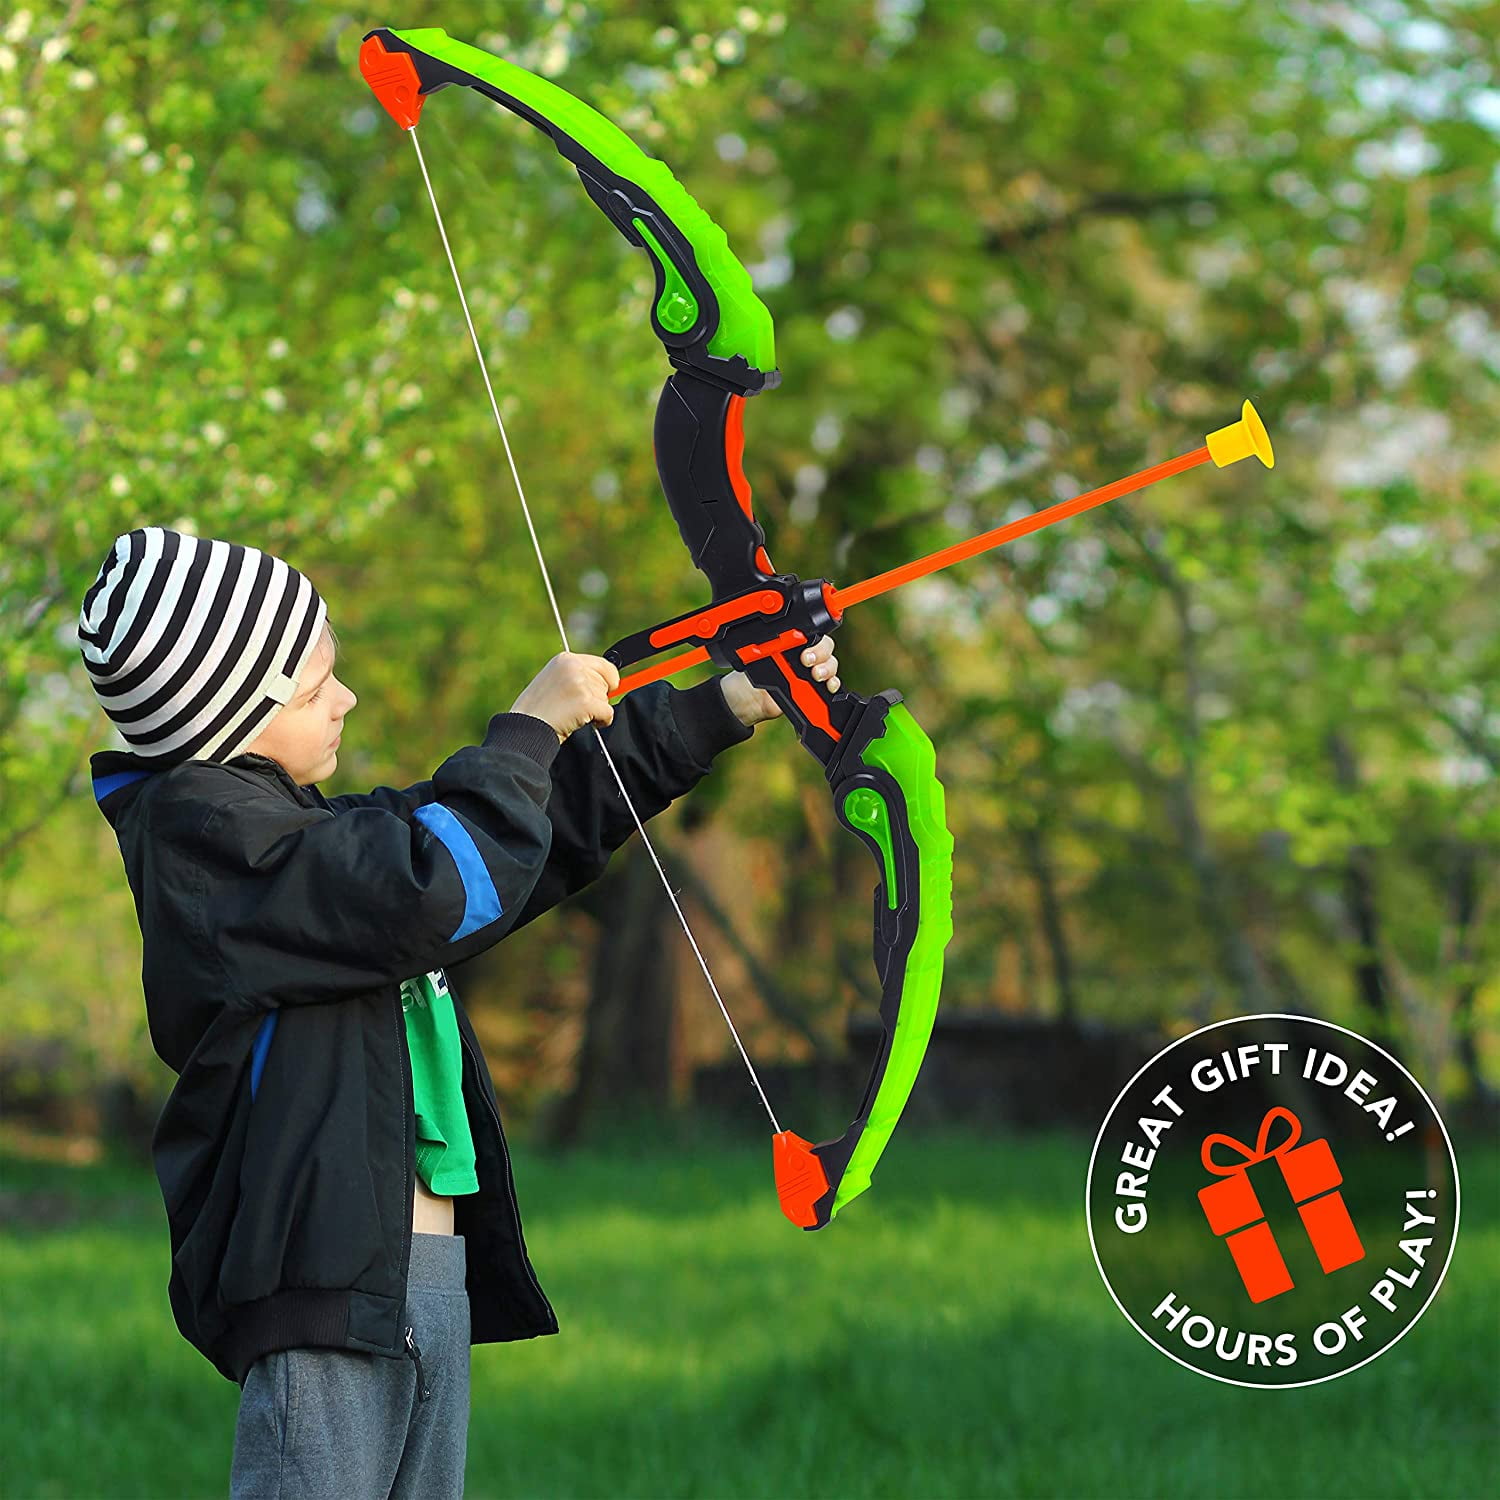 Kids Light Up Archery Toy Play Set w/Bow 3 Suction Cup Arrow Quiver Mount Target 